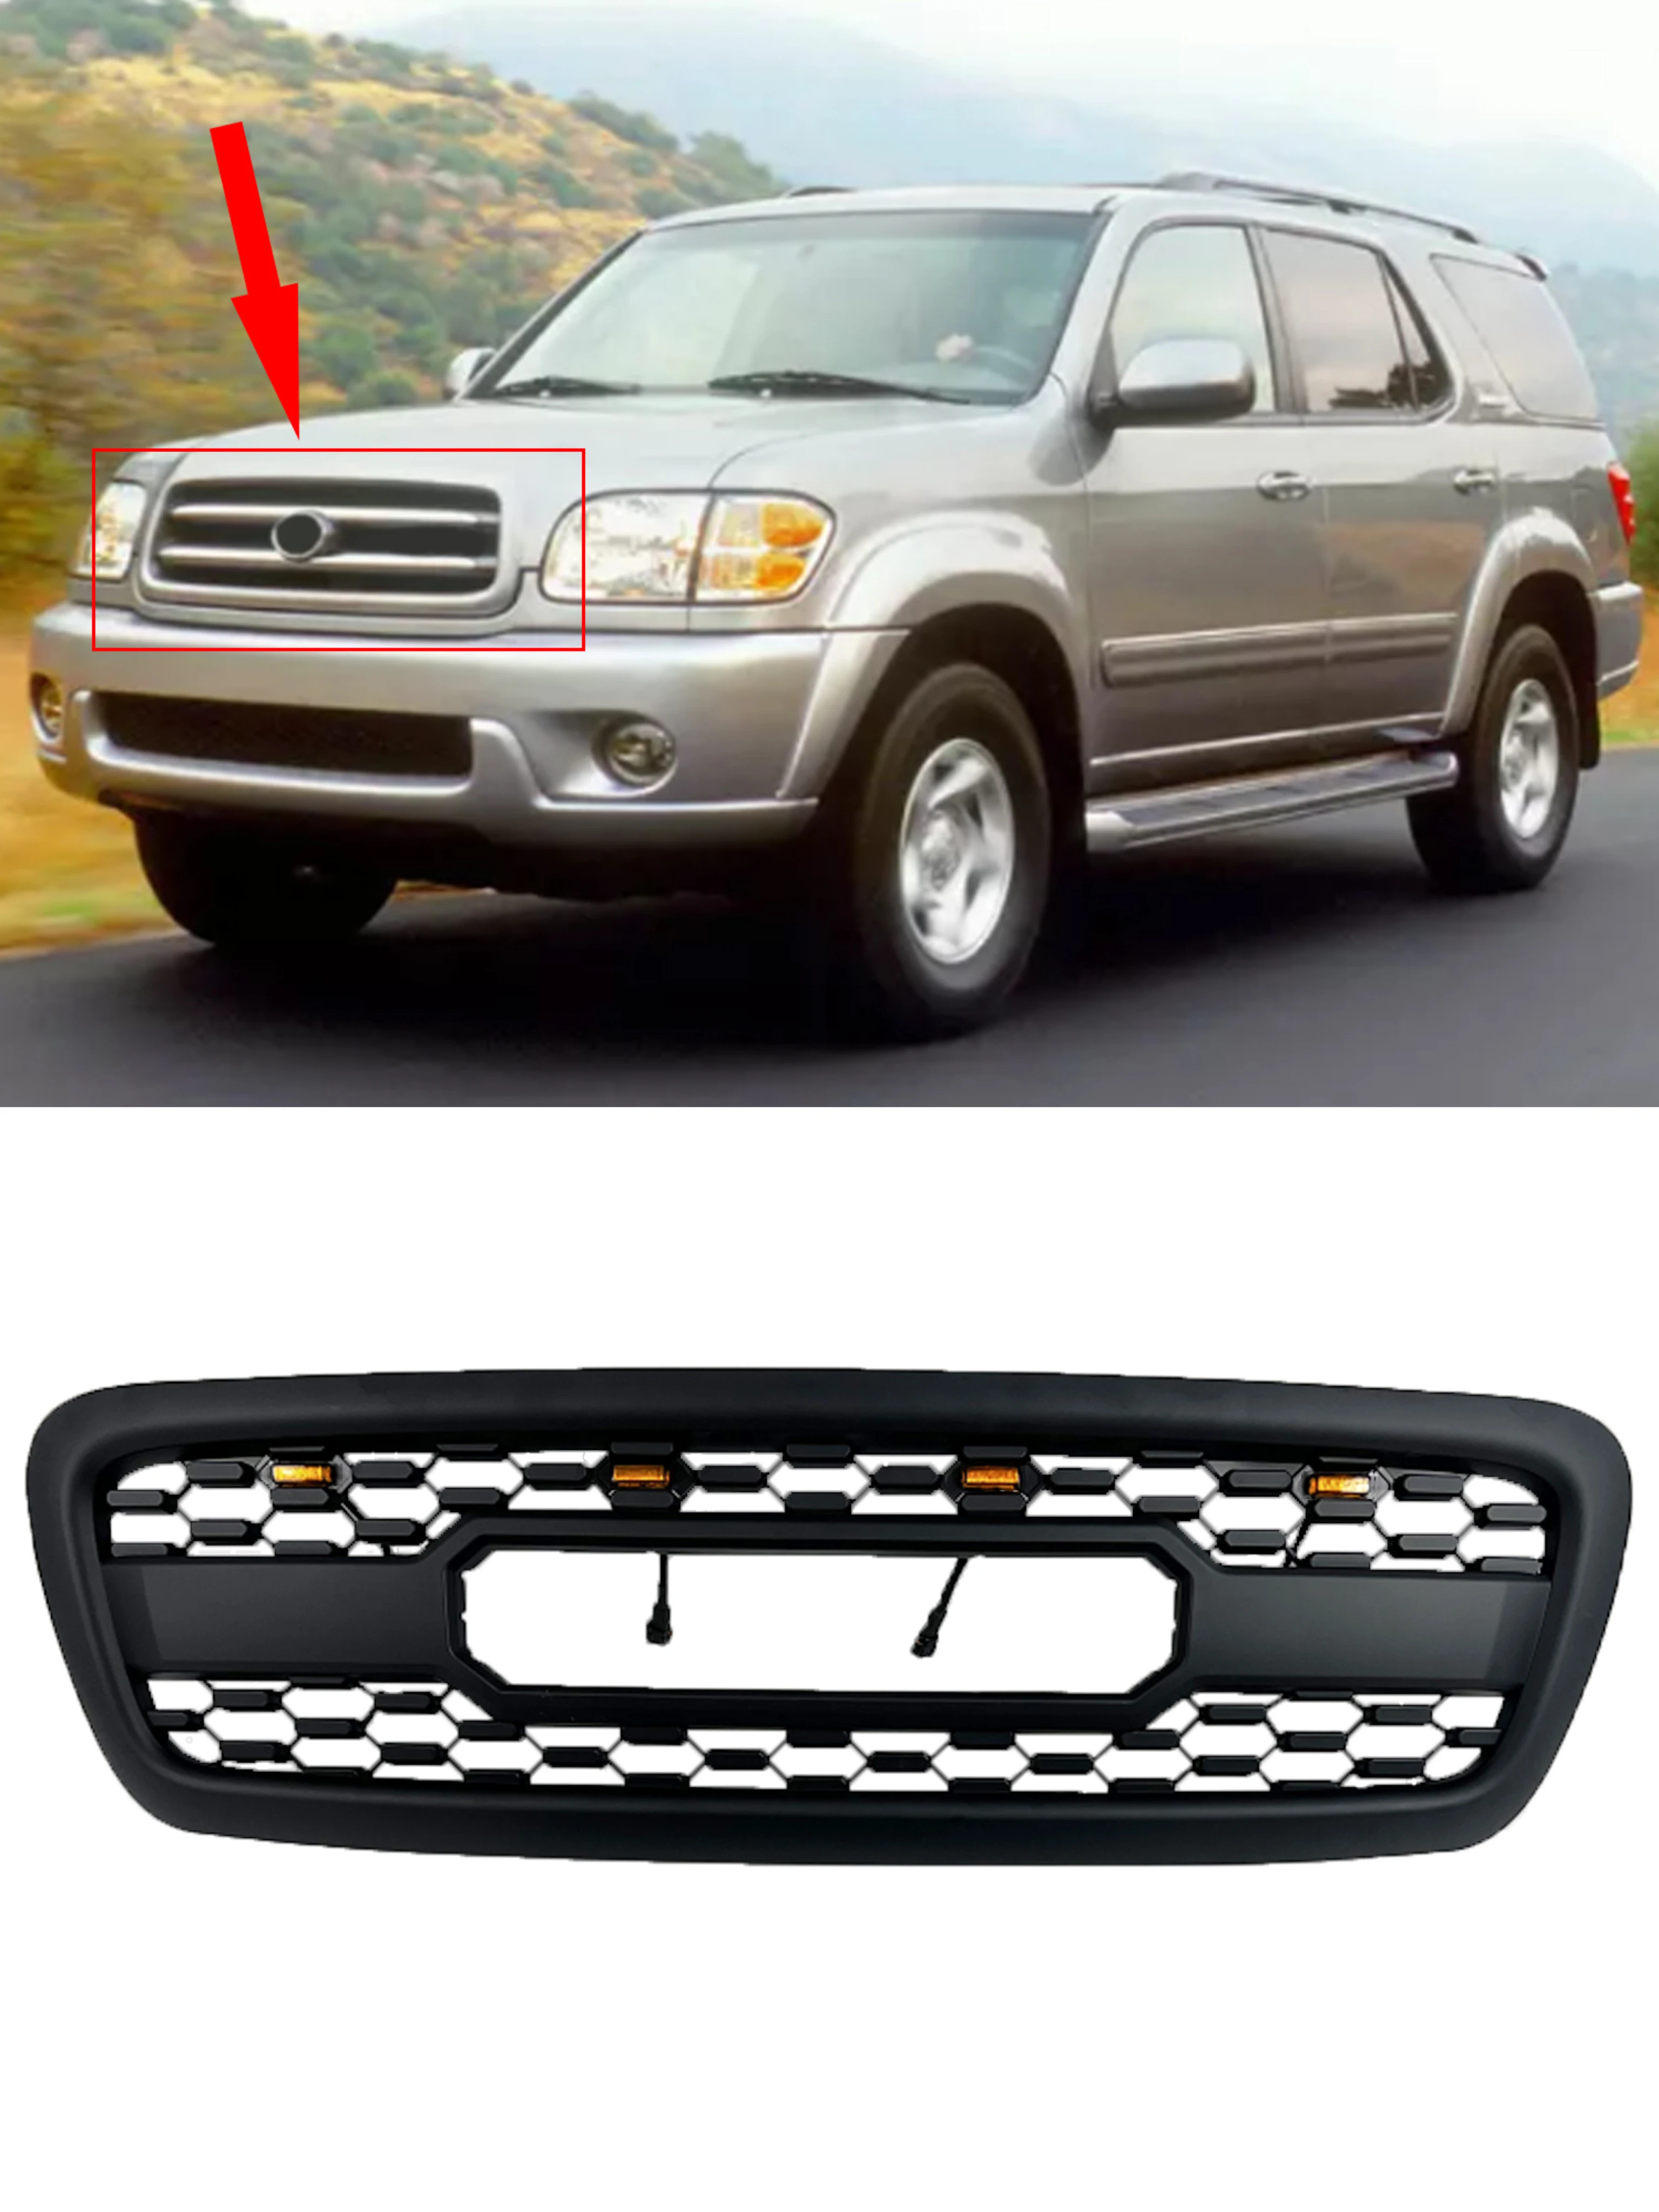 

Front Grille For 2001-2004 Toyota Sequoia Front Bumper Grille Guard Grille Cover Matte black With 4 LED lights and letters